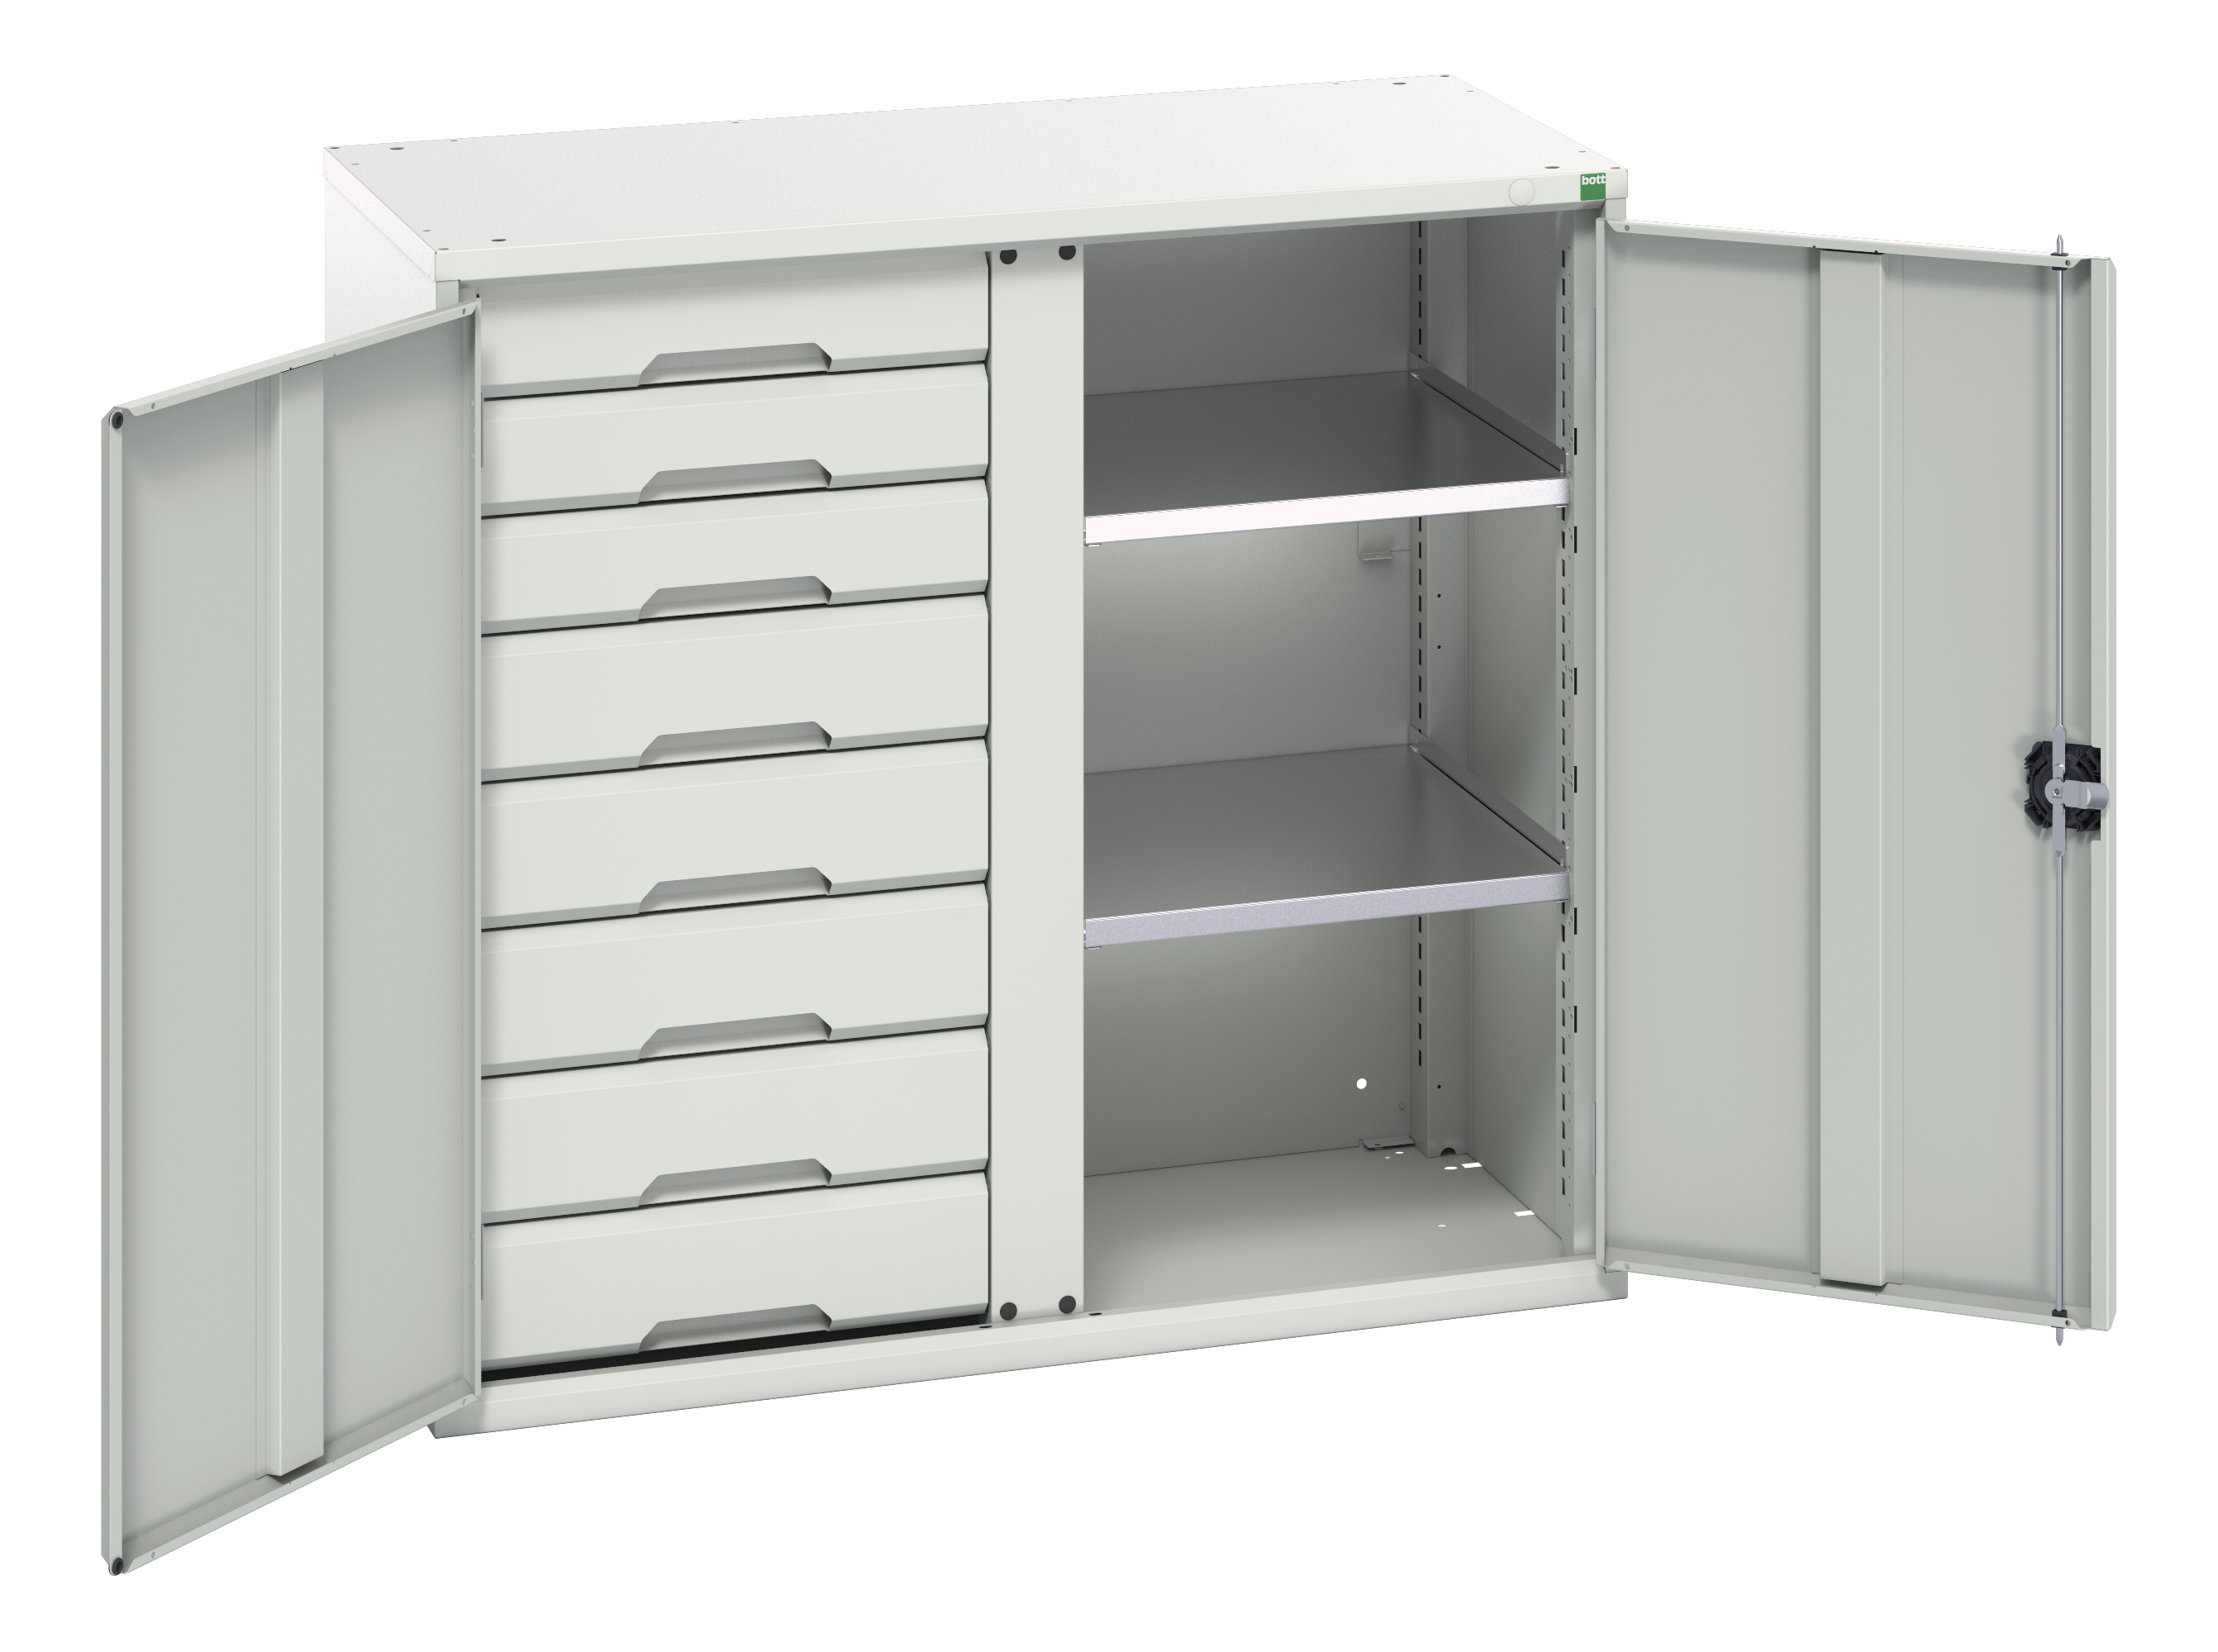 Bott Verso Kitted Cupboard With Vertical Partition - 16926558.16